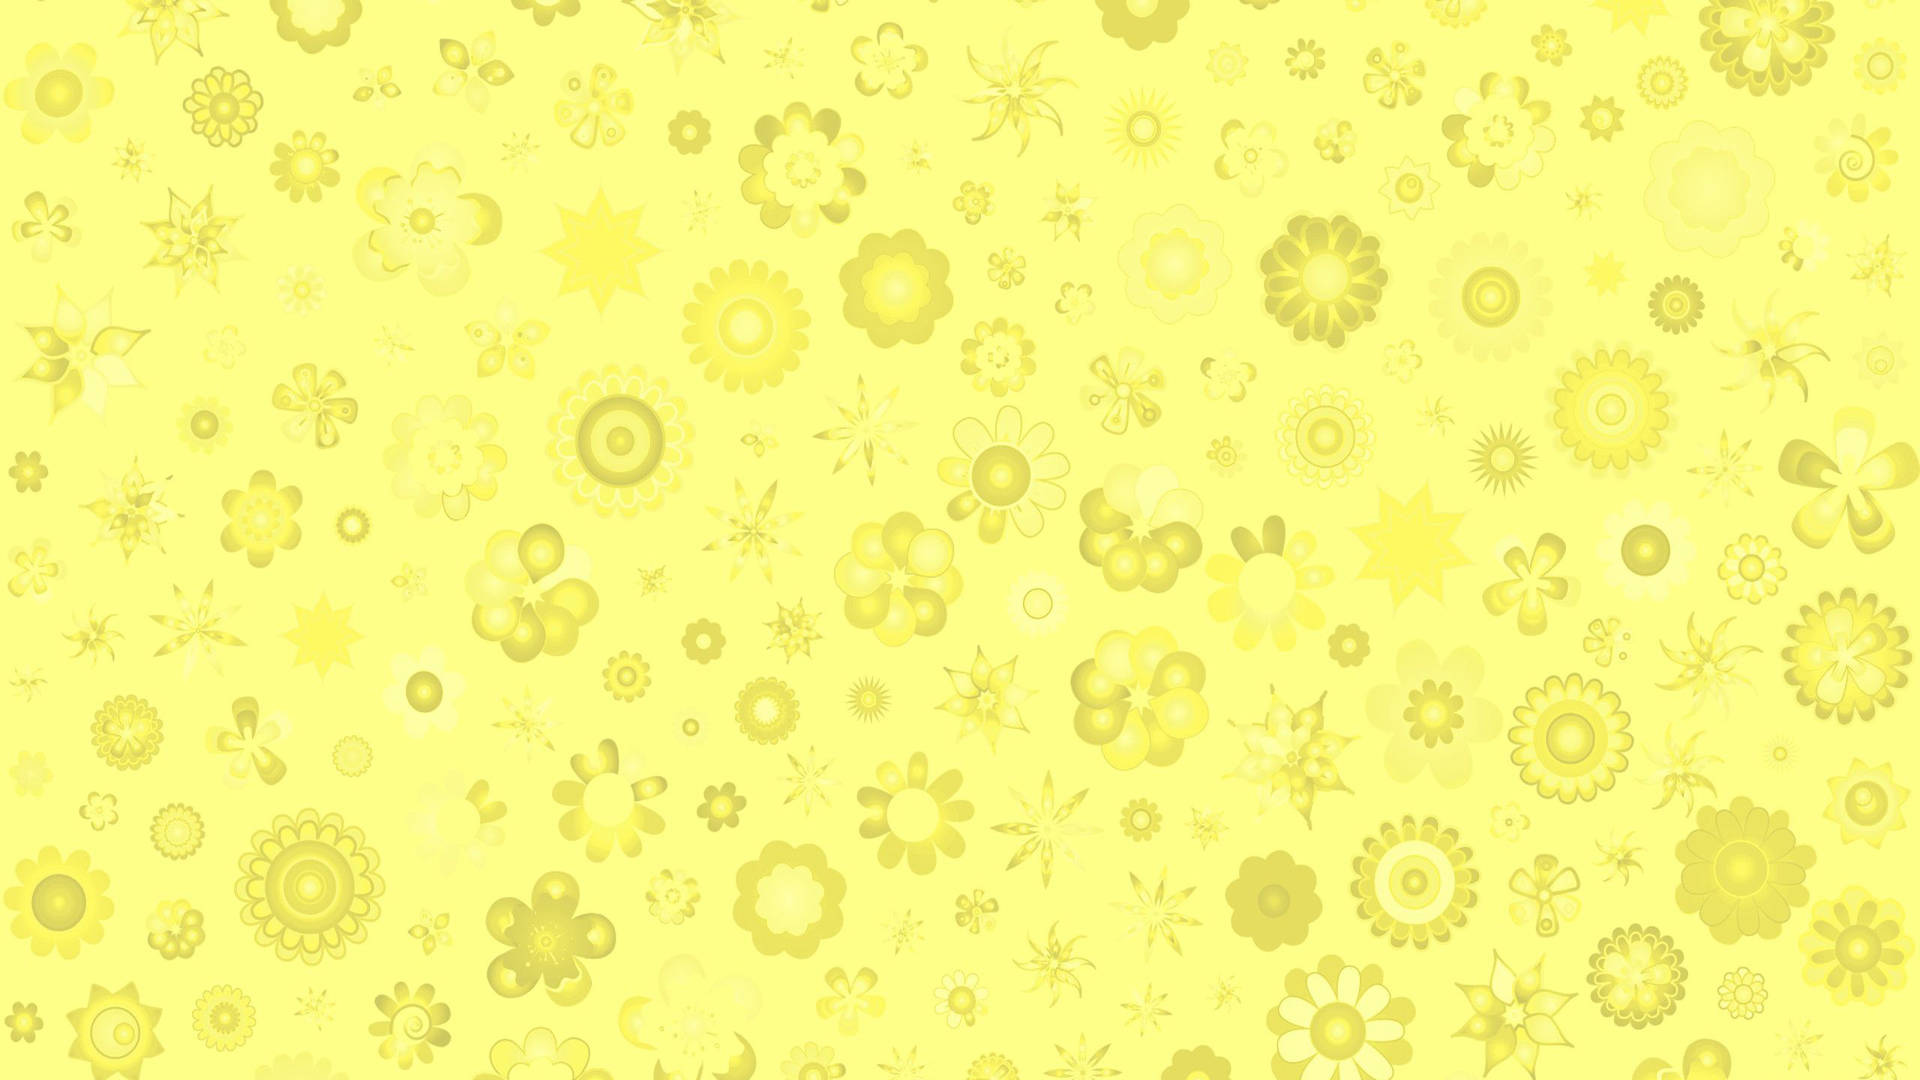 Pastel Yellow Floral Patterns Background